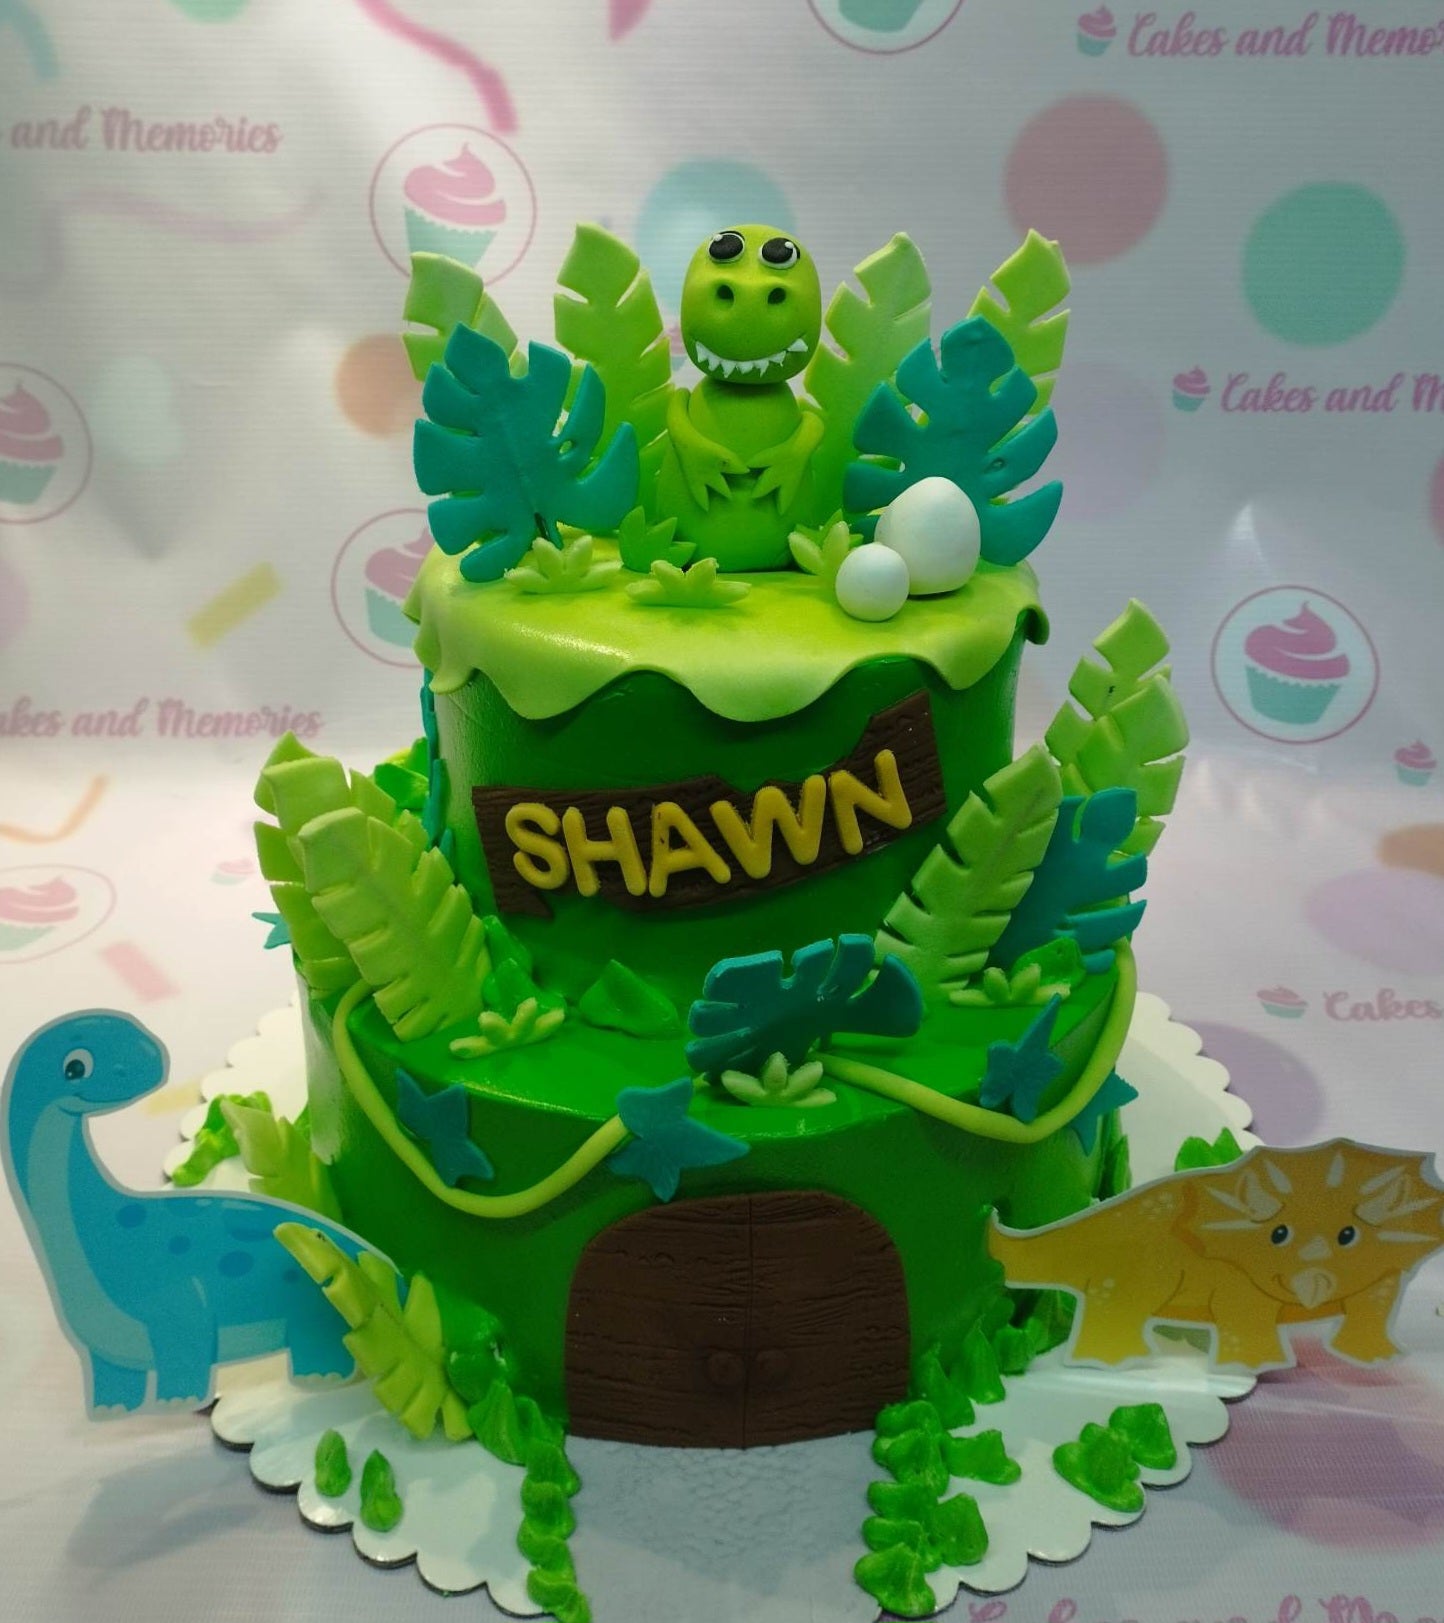 This custom decorated cake features dinosaurs on a blue background. The cake includes a brontosaurus, triceratops, and a raptor in green, perfect for a dinosaur-loving kid's birthday. Bring Jurassic Park and Jurassic World to life with this dinosaur-themed cake.